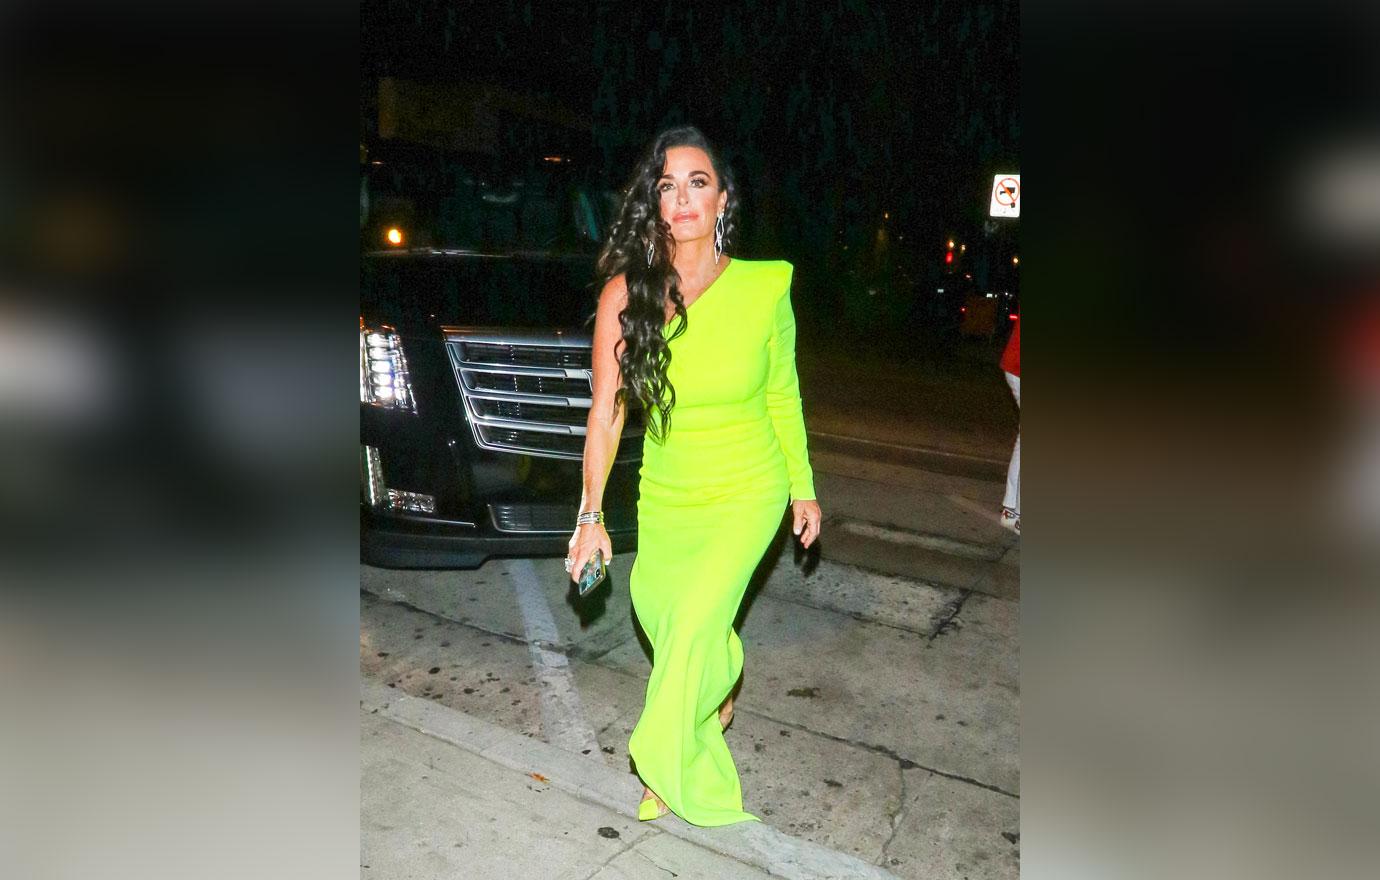 Kyle Richards The Real Housewives of Beverly Hills 9.18 June 11, 2019 –  Star Style